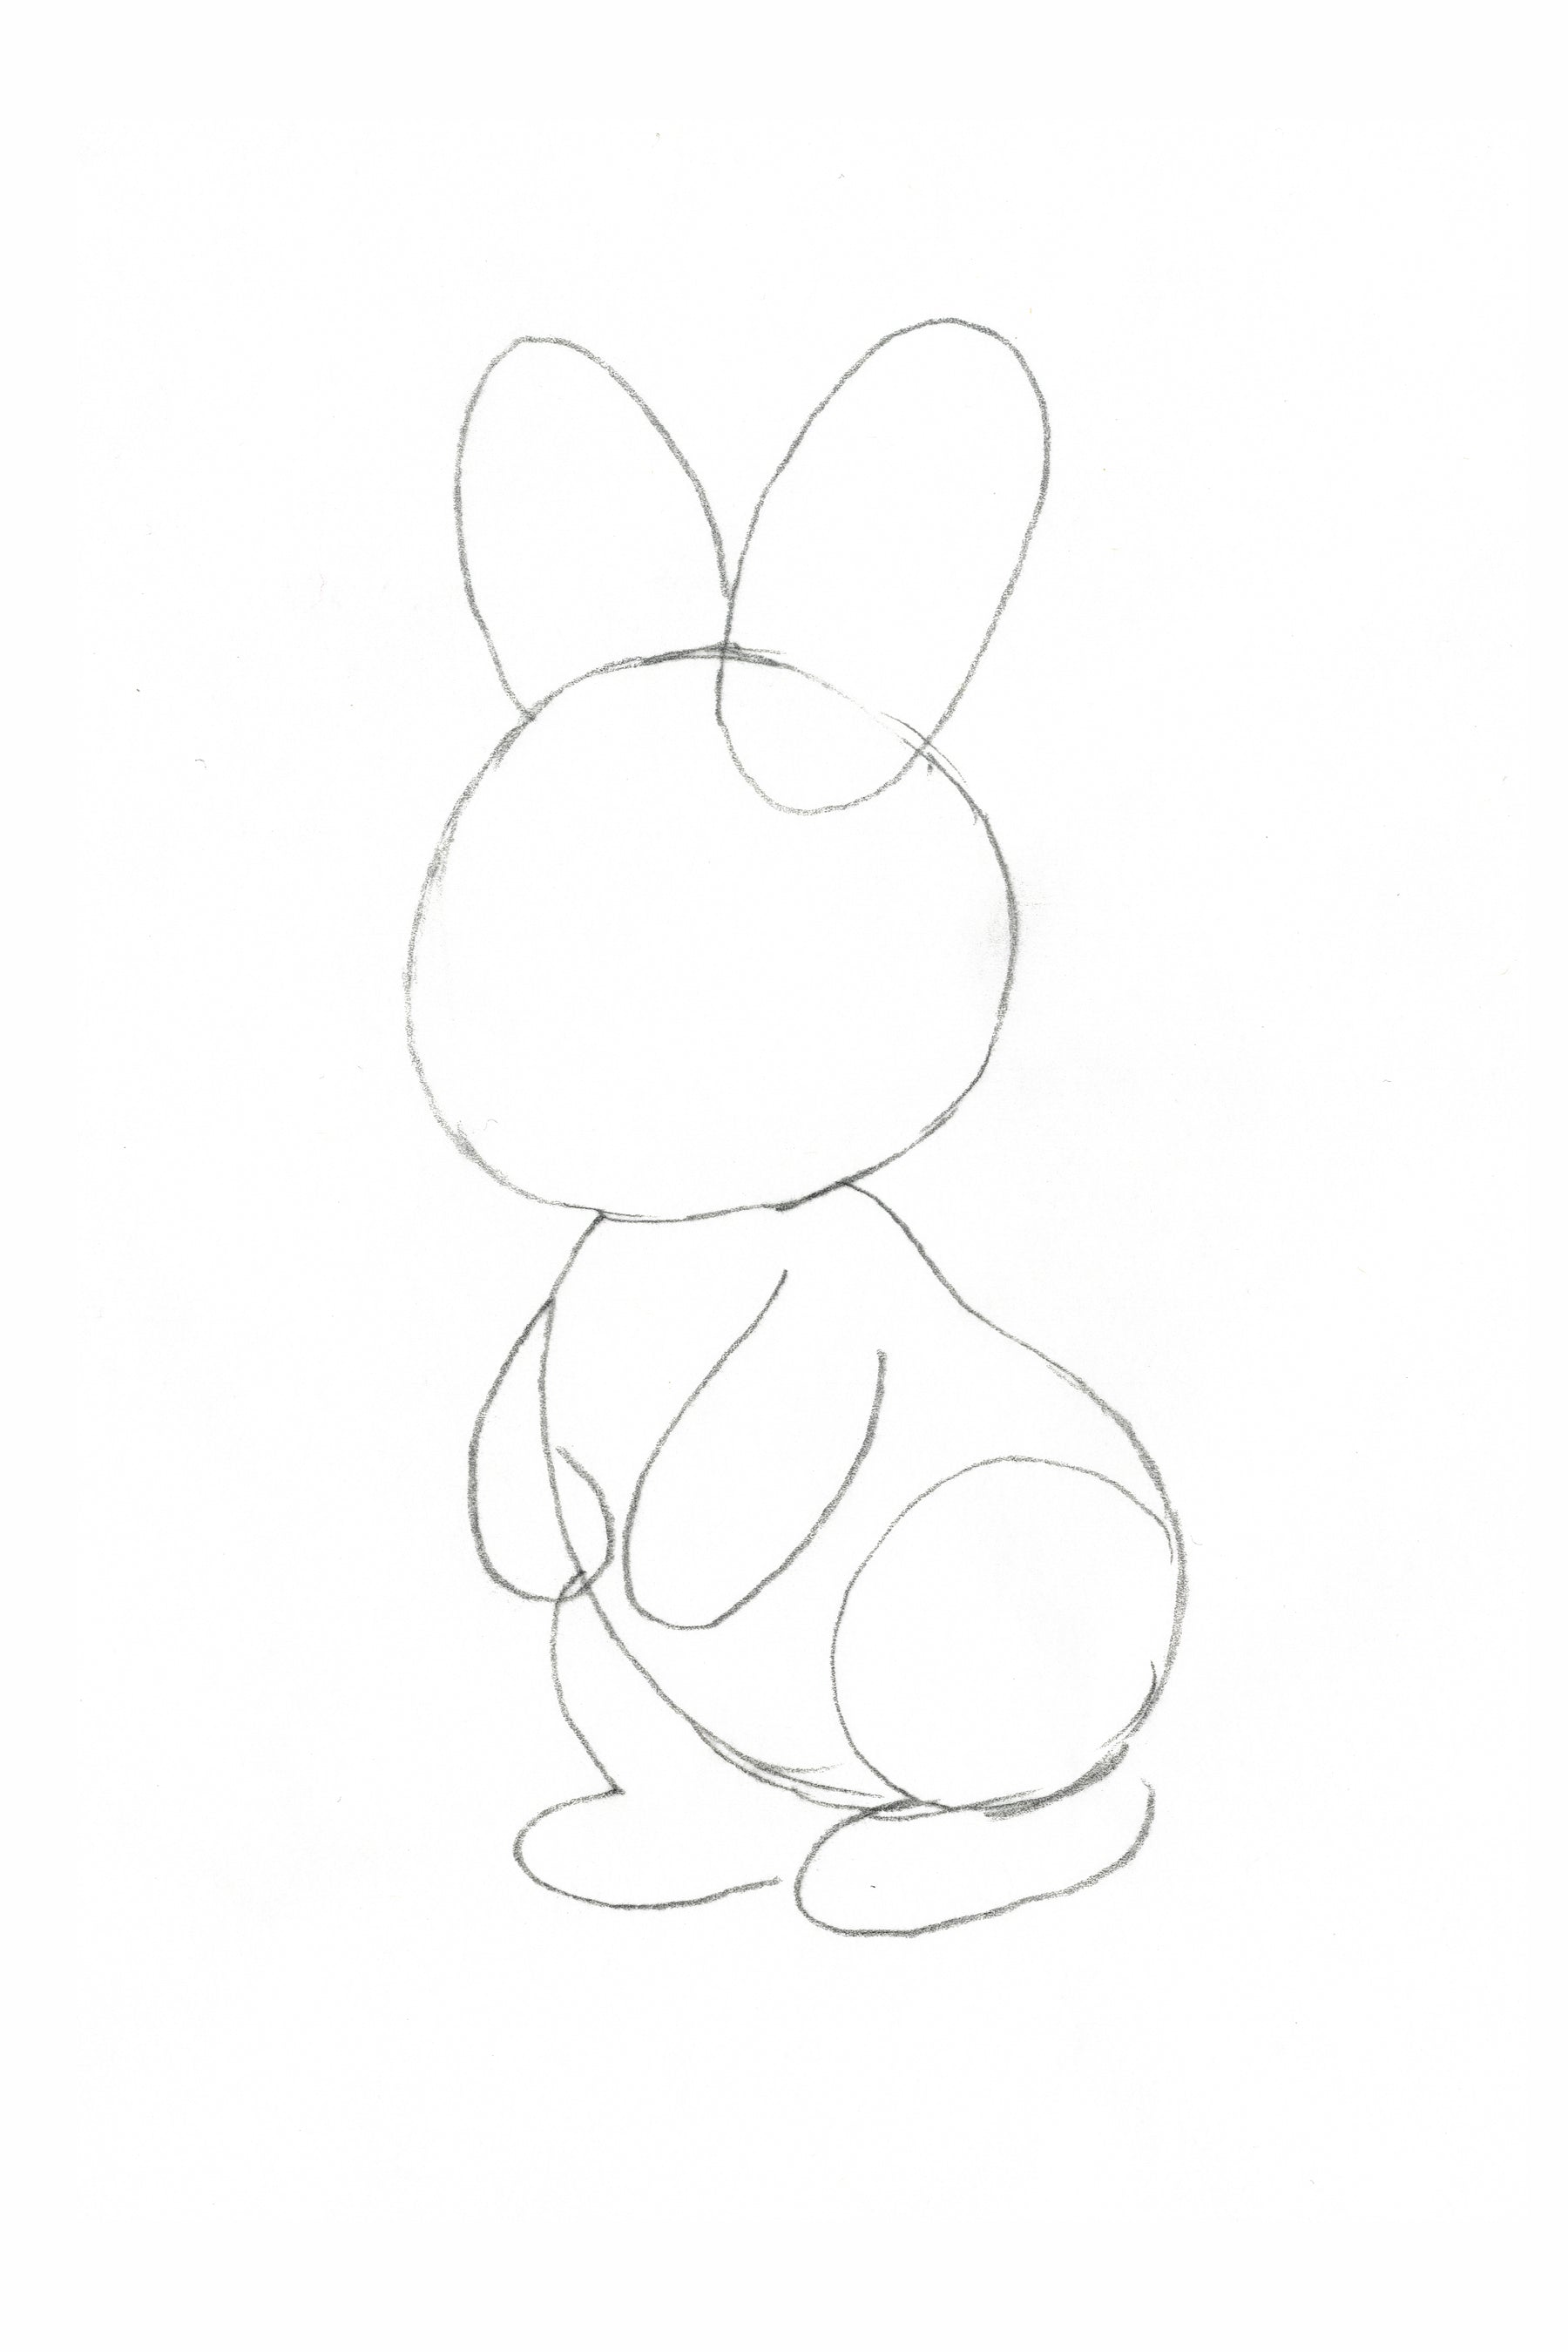 Bunny Sketch Vector Images (over 9,600)